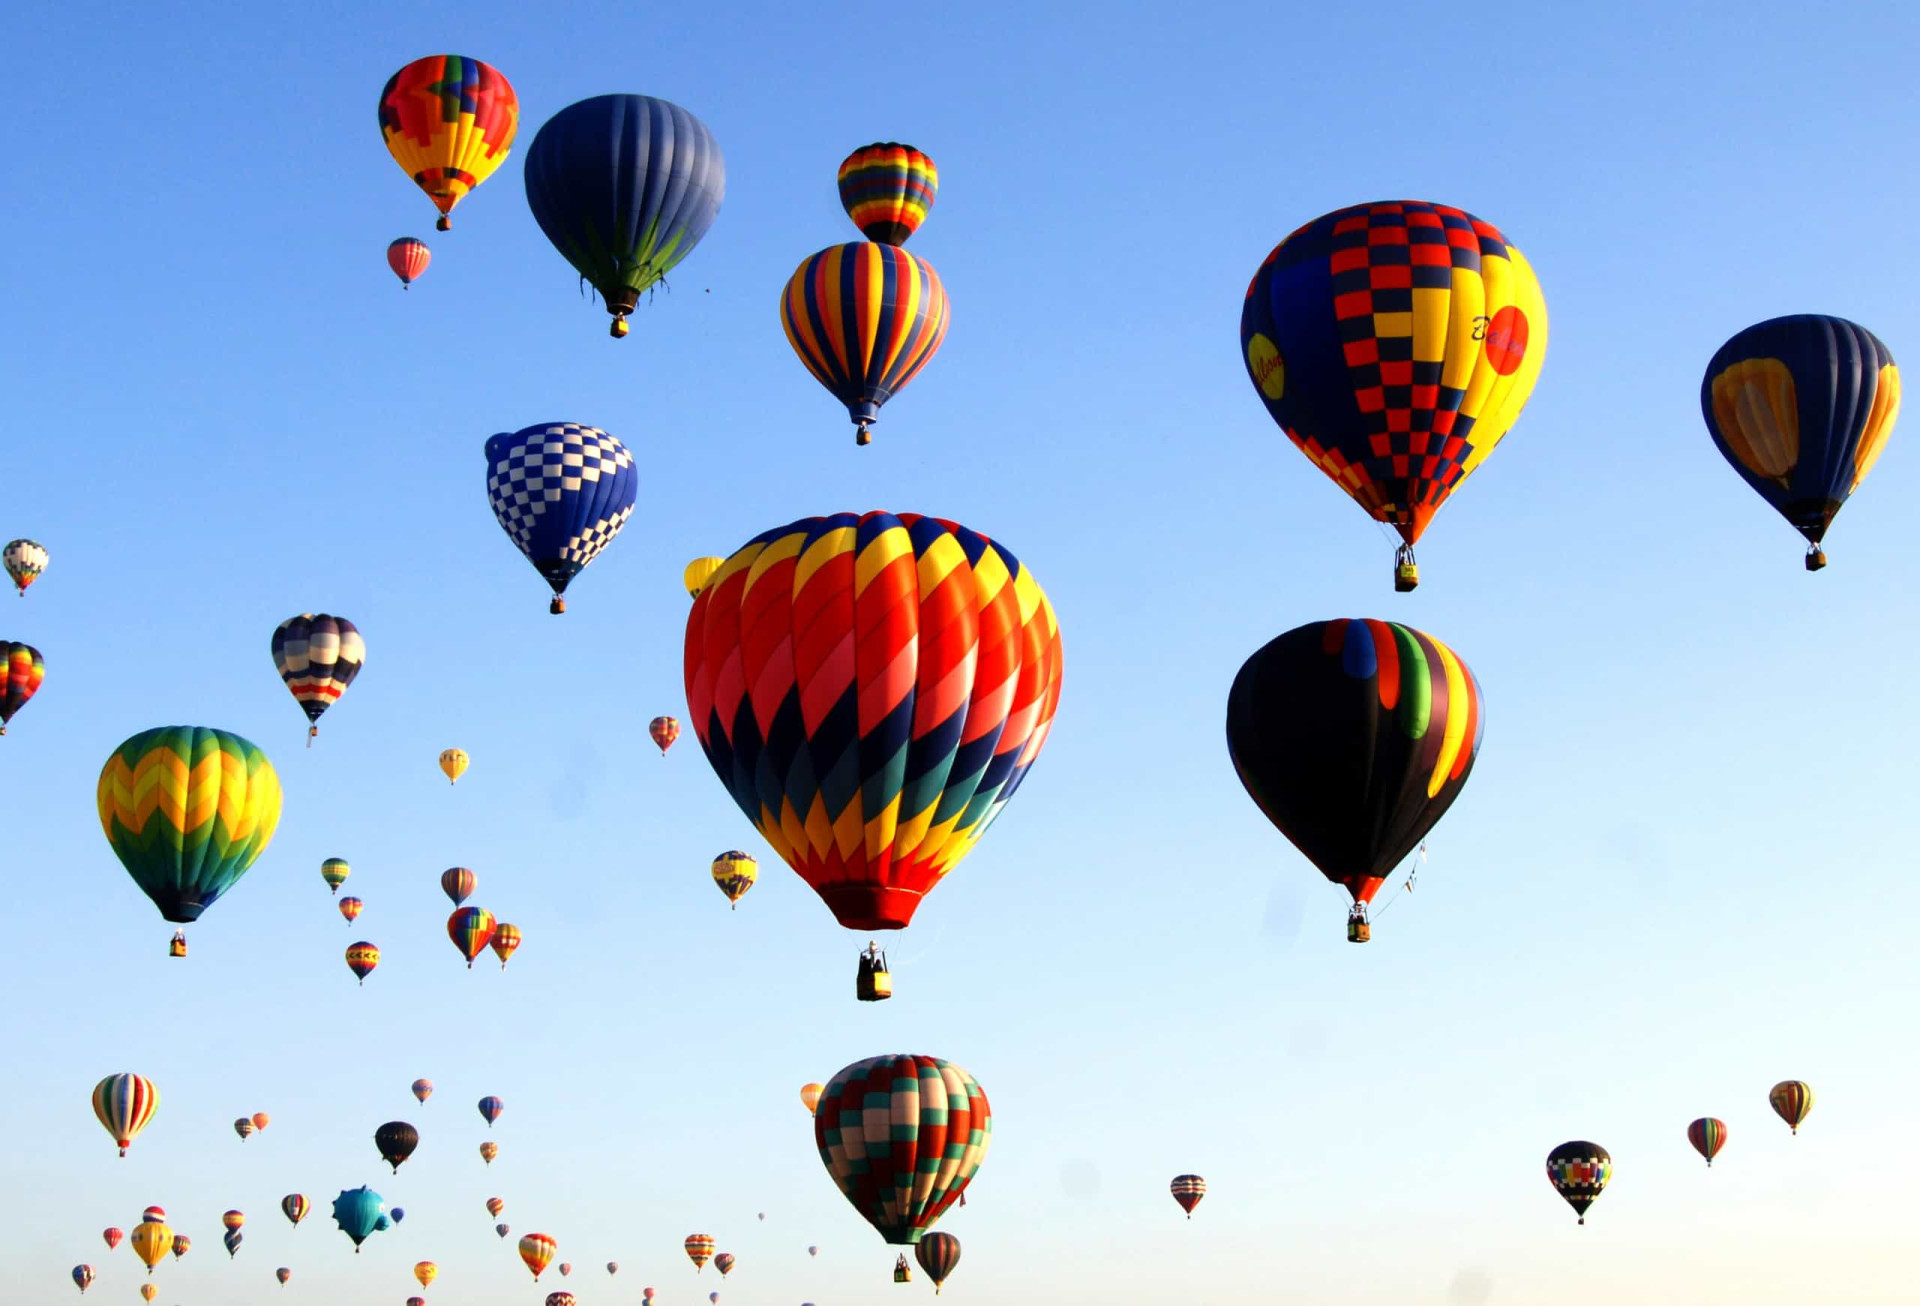 <p>Each autumn, Albuquerque hosts the world's largest hot air balloon festival. During the nine-day event, which attracts upwards of 80,000 people, over 500 colorful balloons take to the air, with the breathtaking "mass ascension" (pictured) being the main highlight.</p>